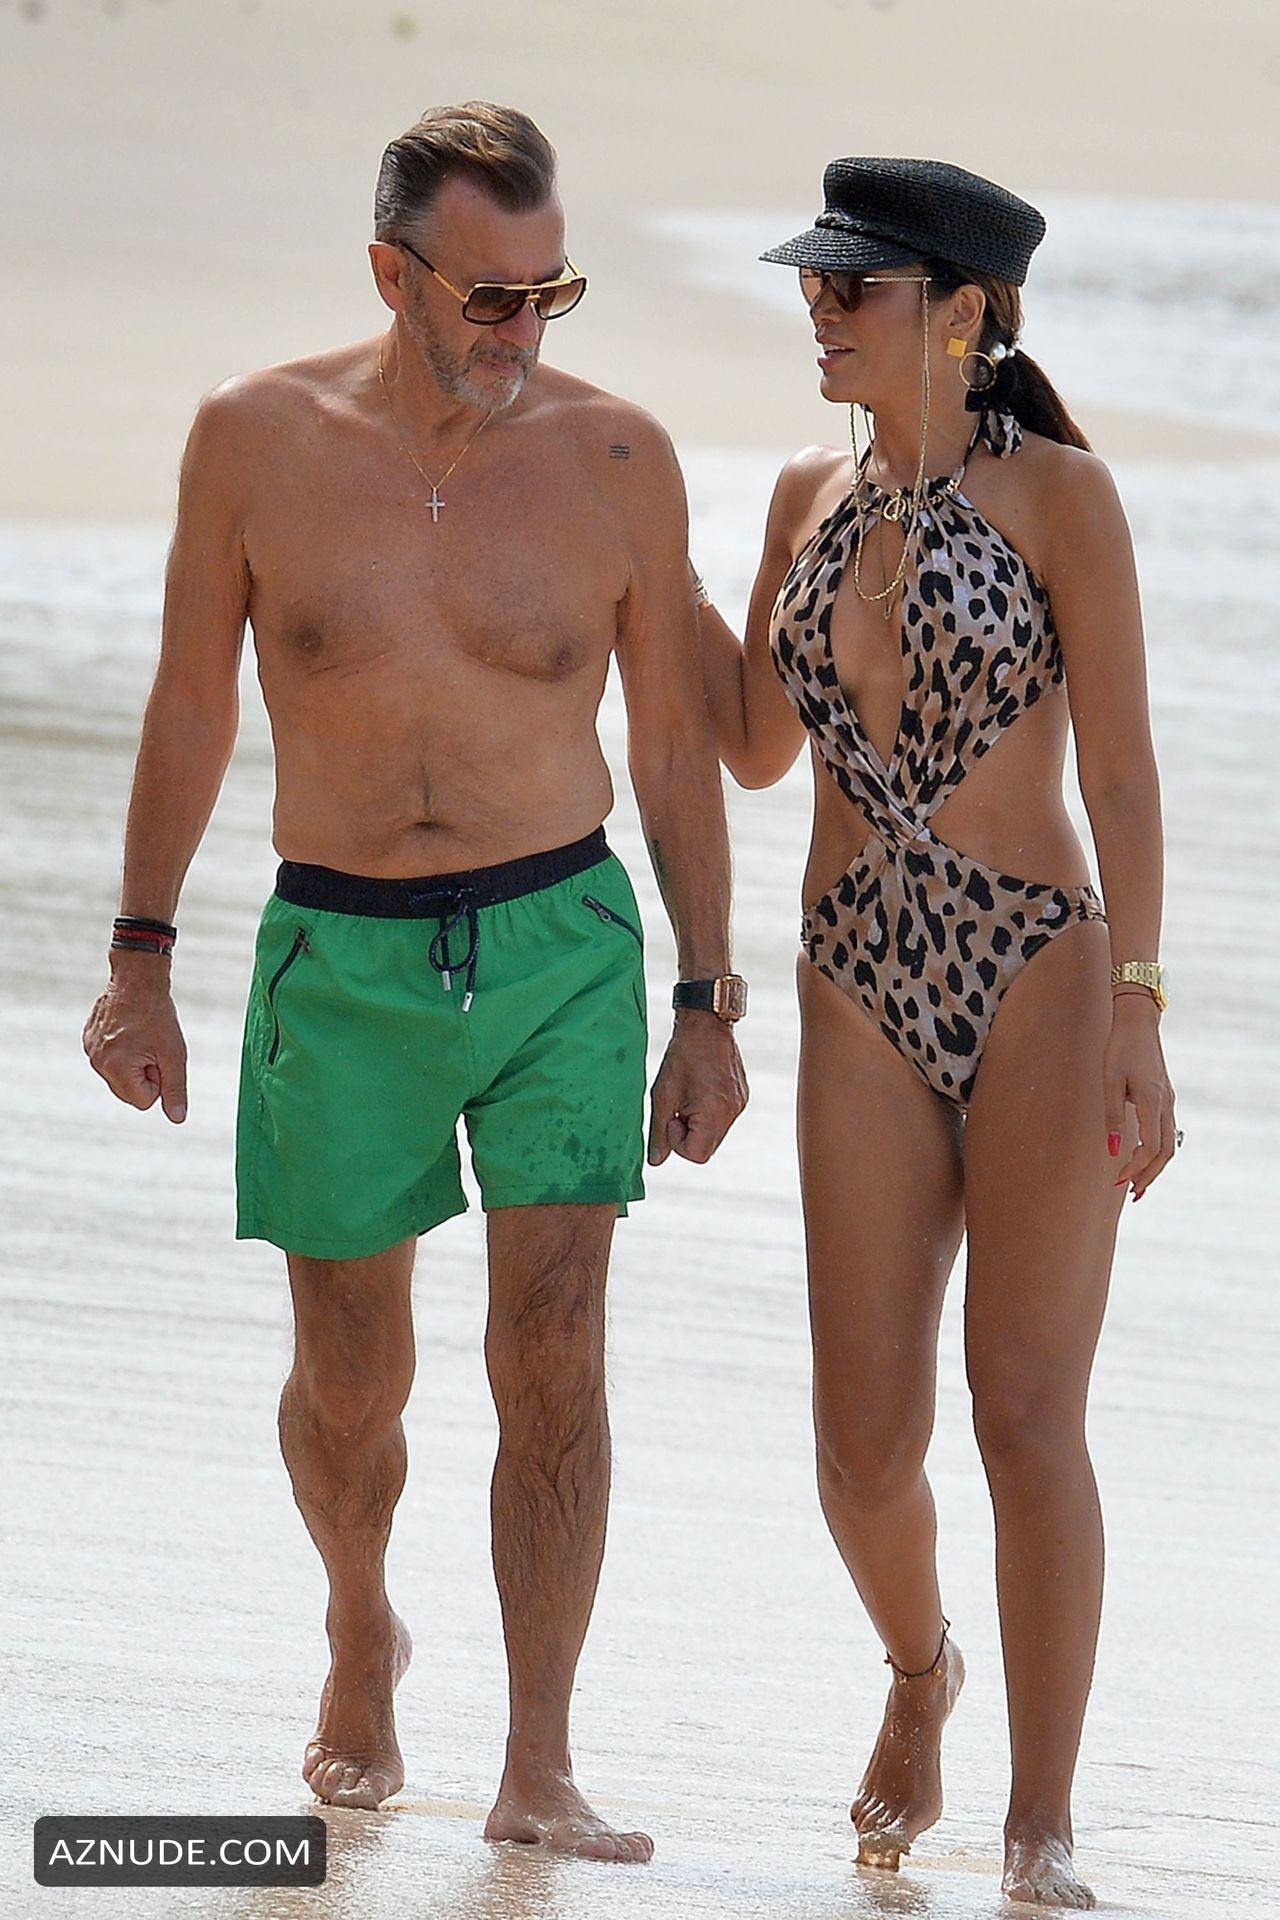 Duncan Bannatyne And His Wife Nigora Bannatyne Make A Splash On The Beach And Have Some Fun In